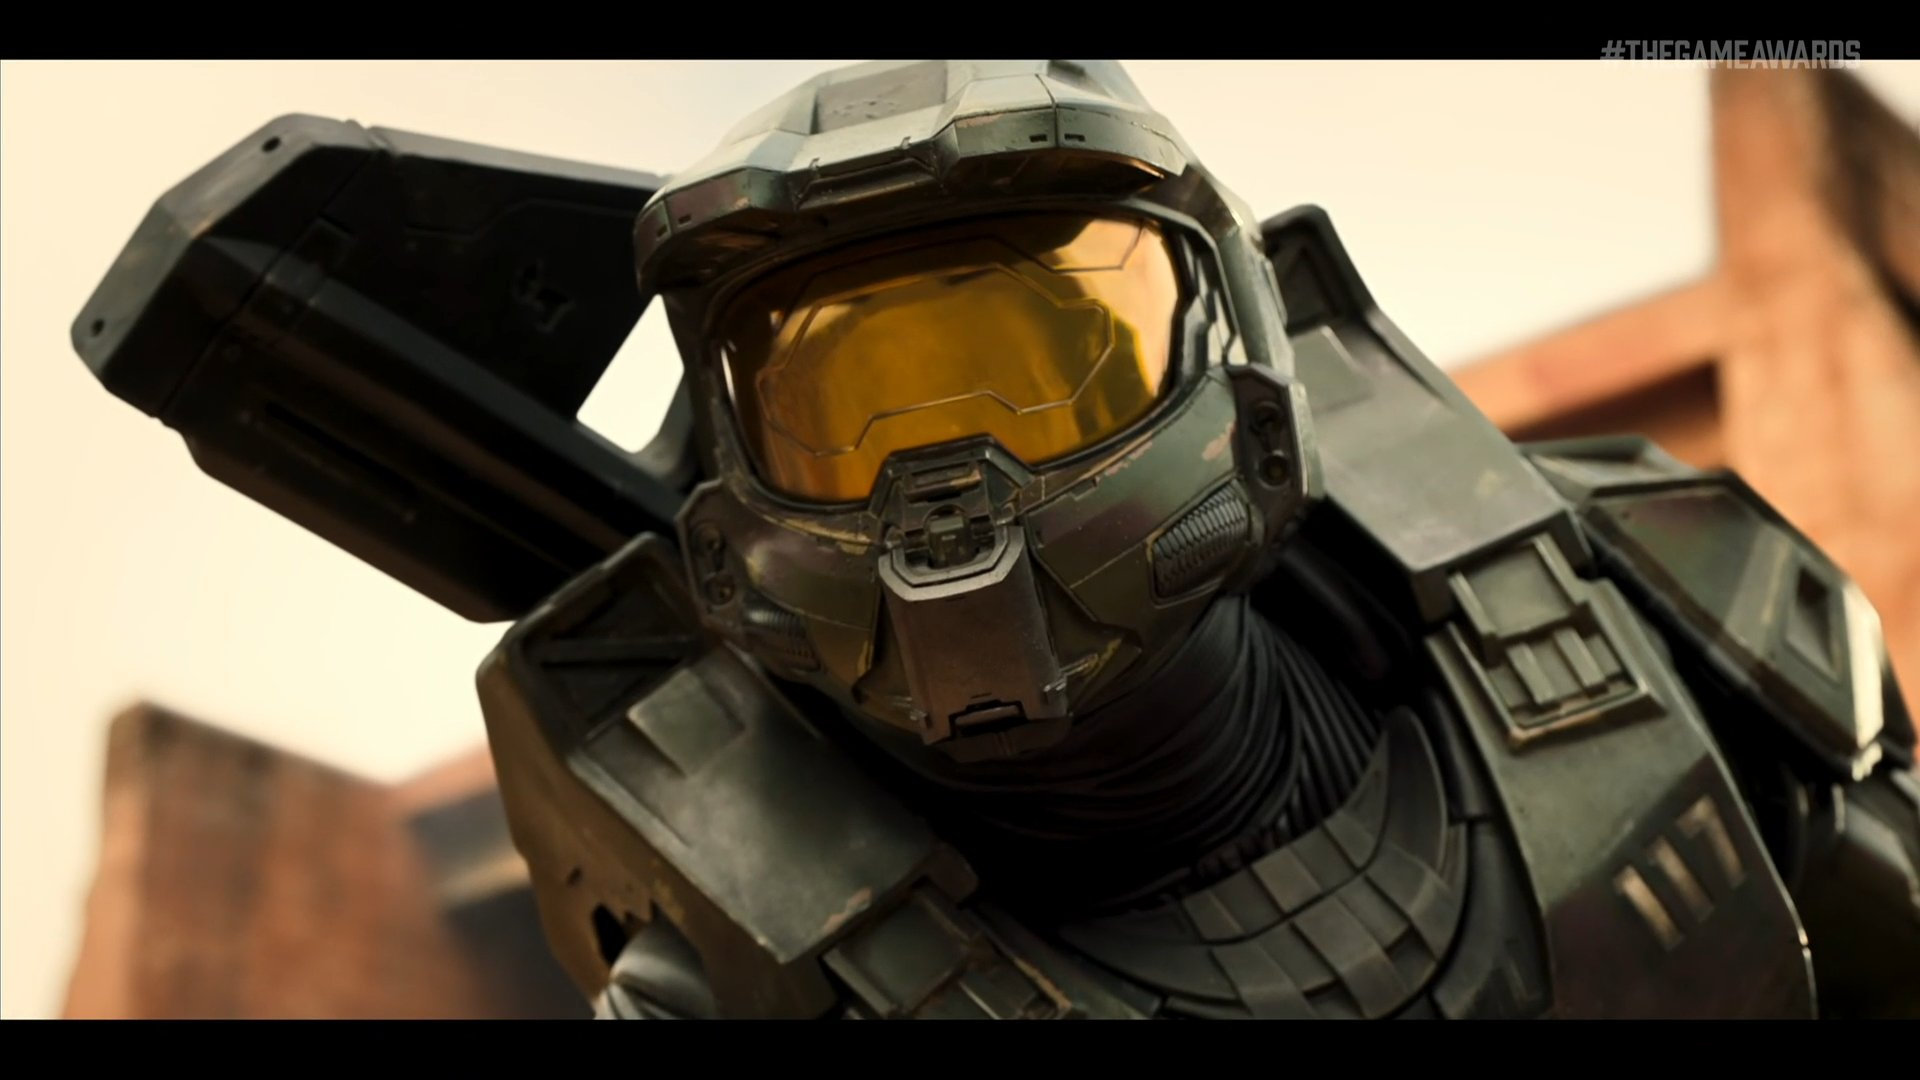 Halo live-action series releases in early 2022, details revealed - Dot Esports